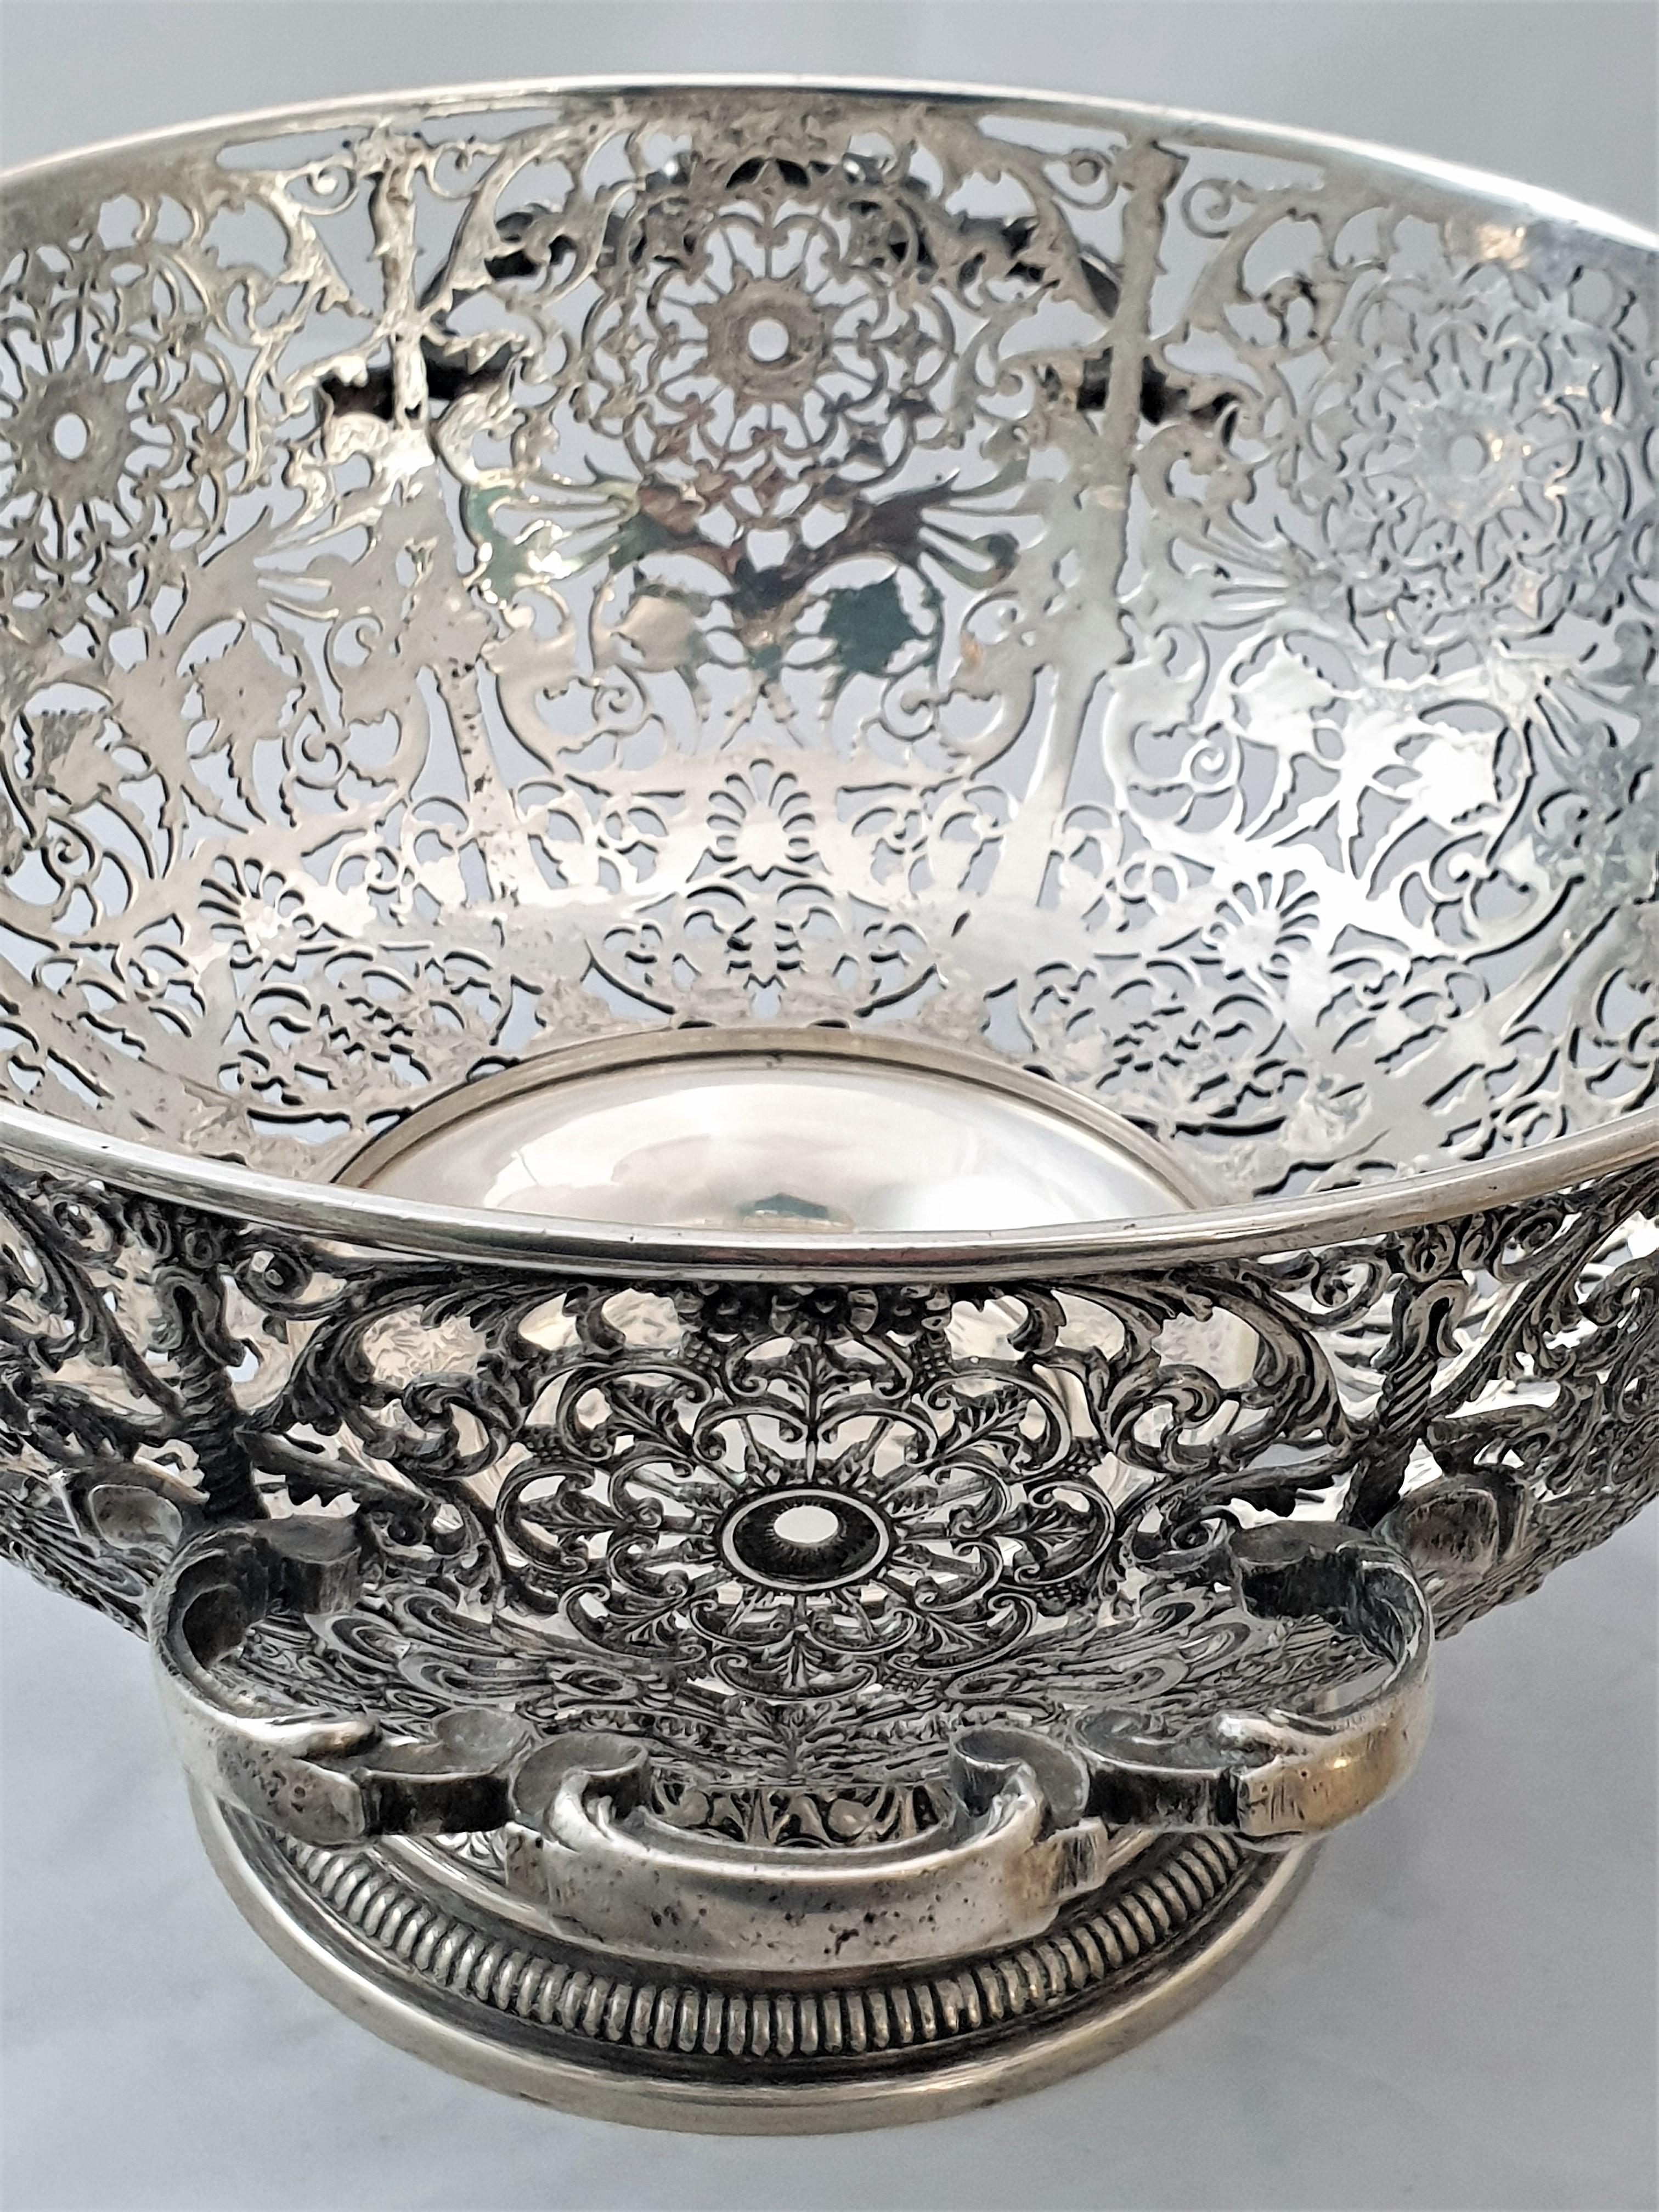 20th Century Italian Silver Fretwork Basket with Cover by Messulam Milan Italy For Sale 3